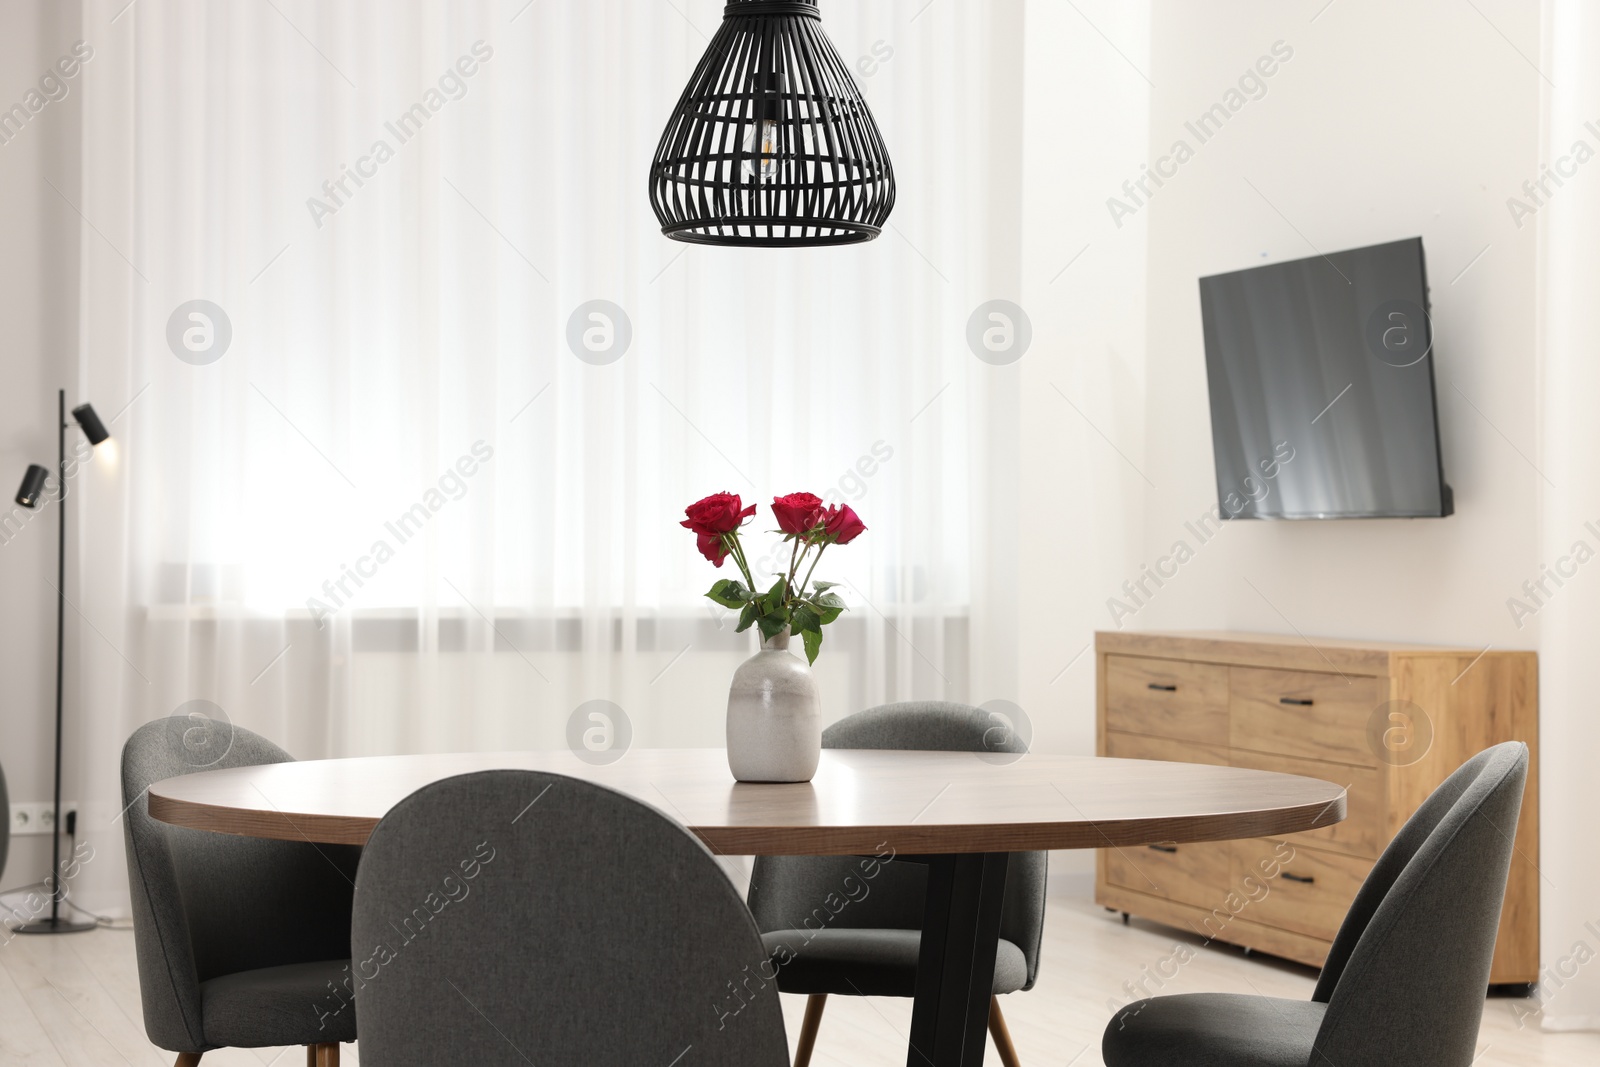 Photo of Chairs and table with vase of red rose flowers in dining room. Stylish interior